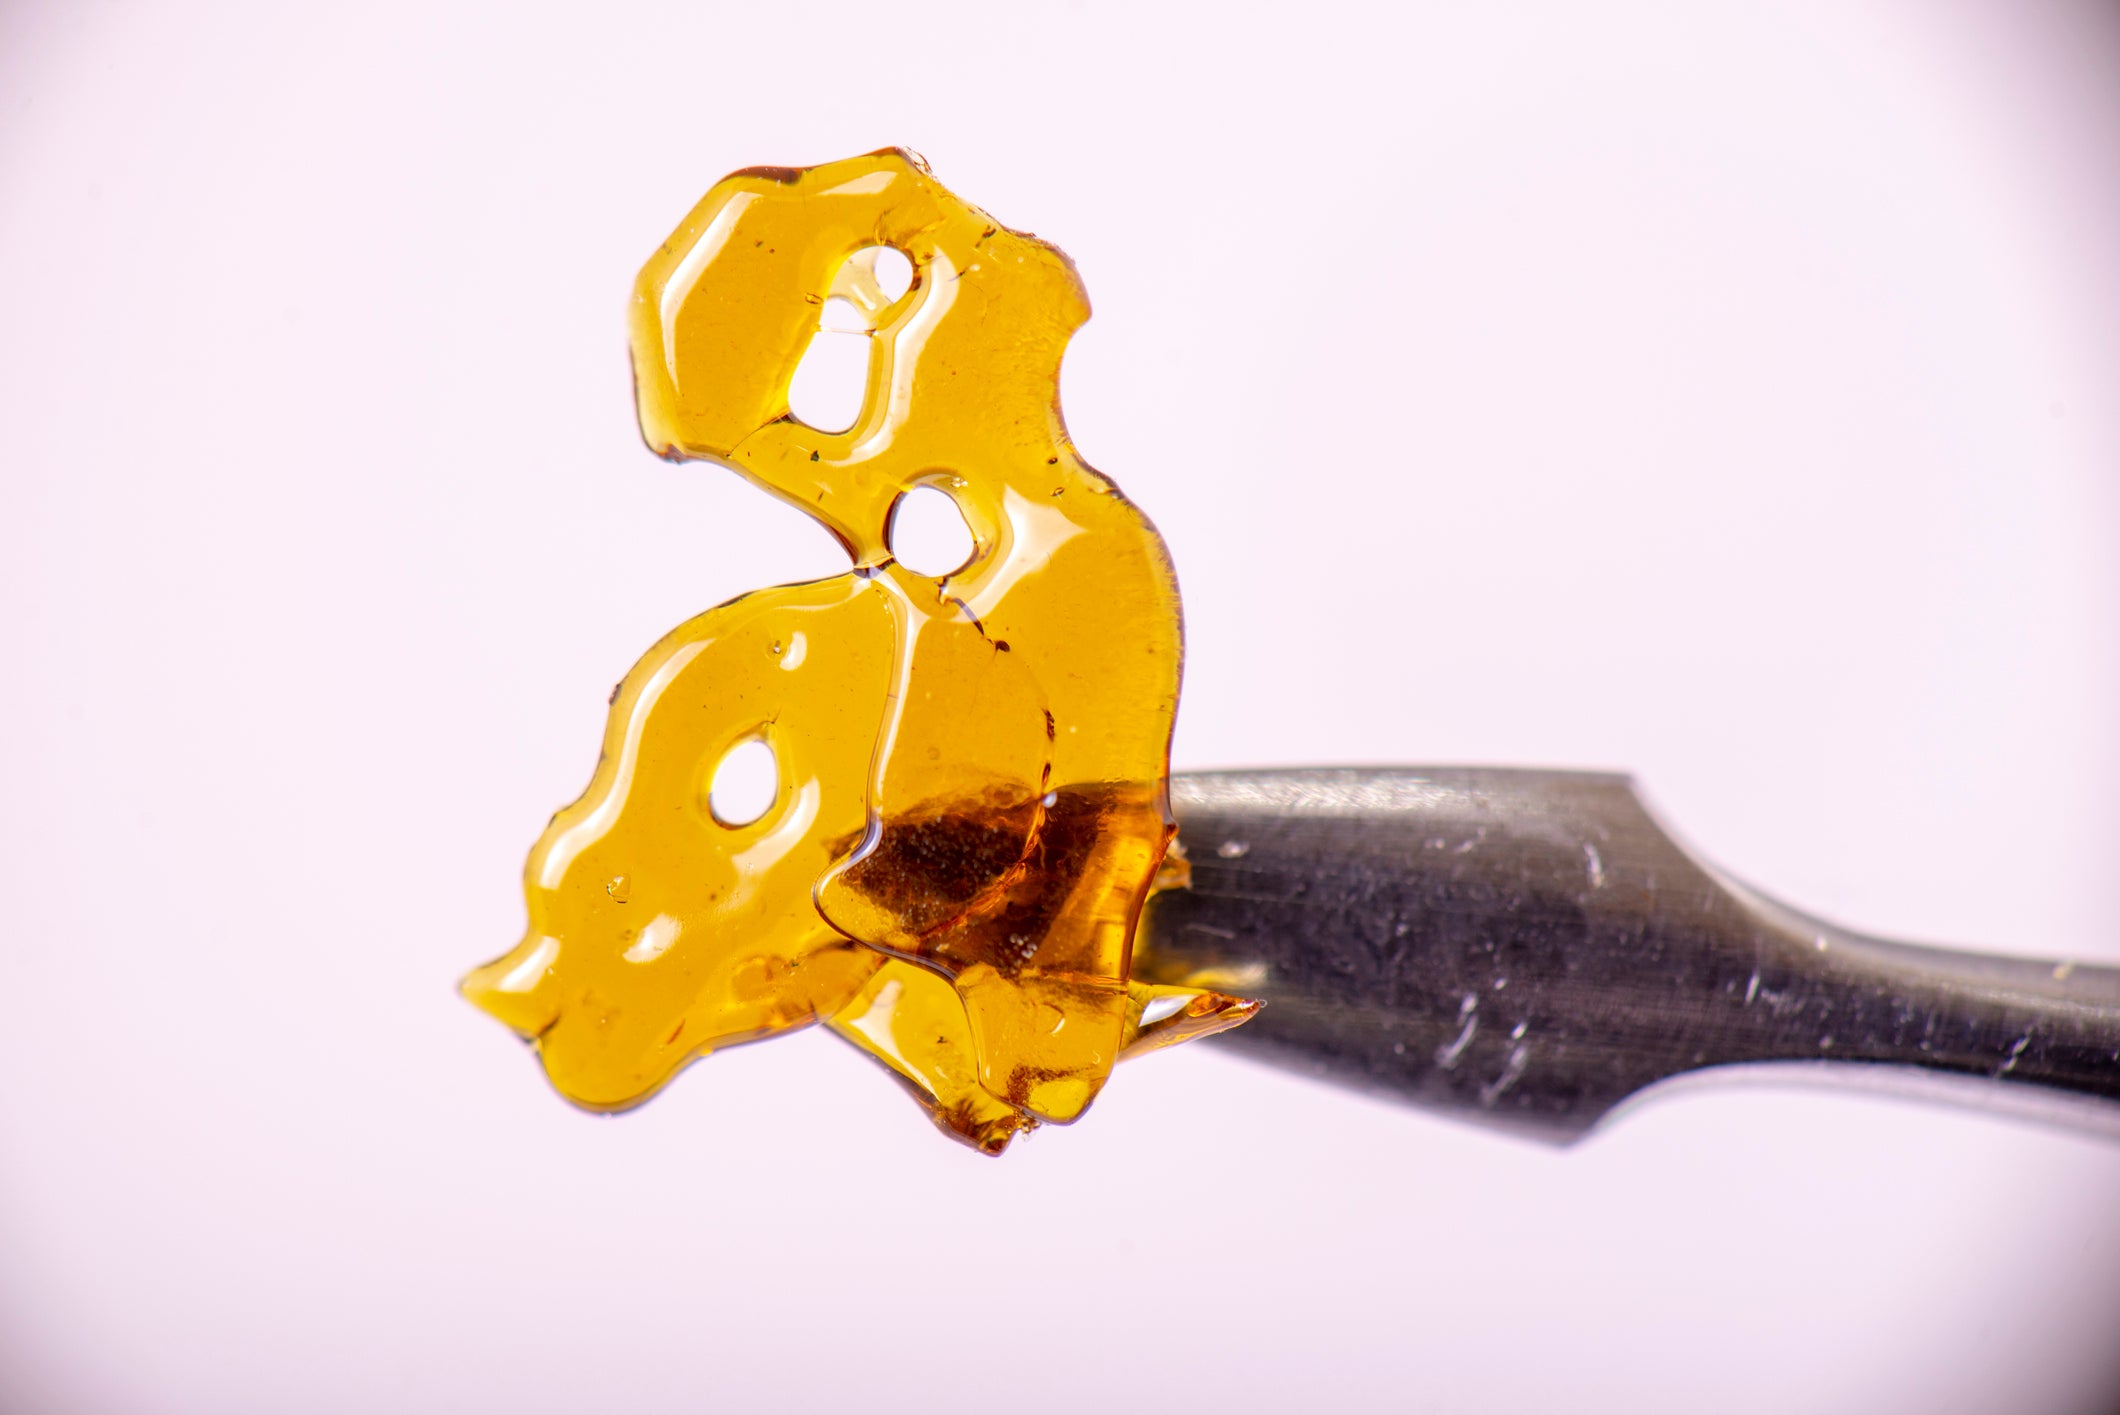 A flat, glassy, amber dab called shatter is served on a dabbing tool.